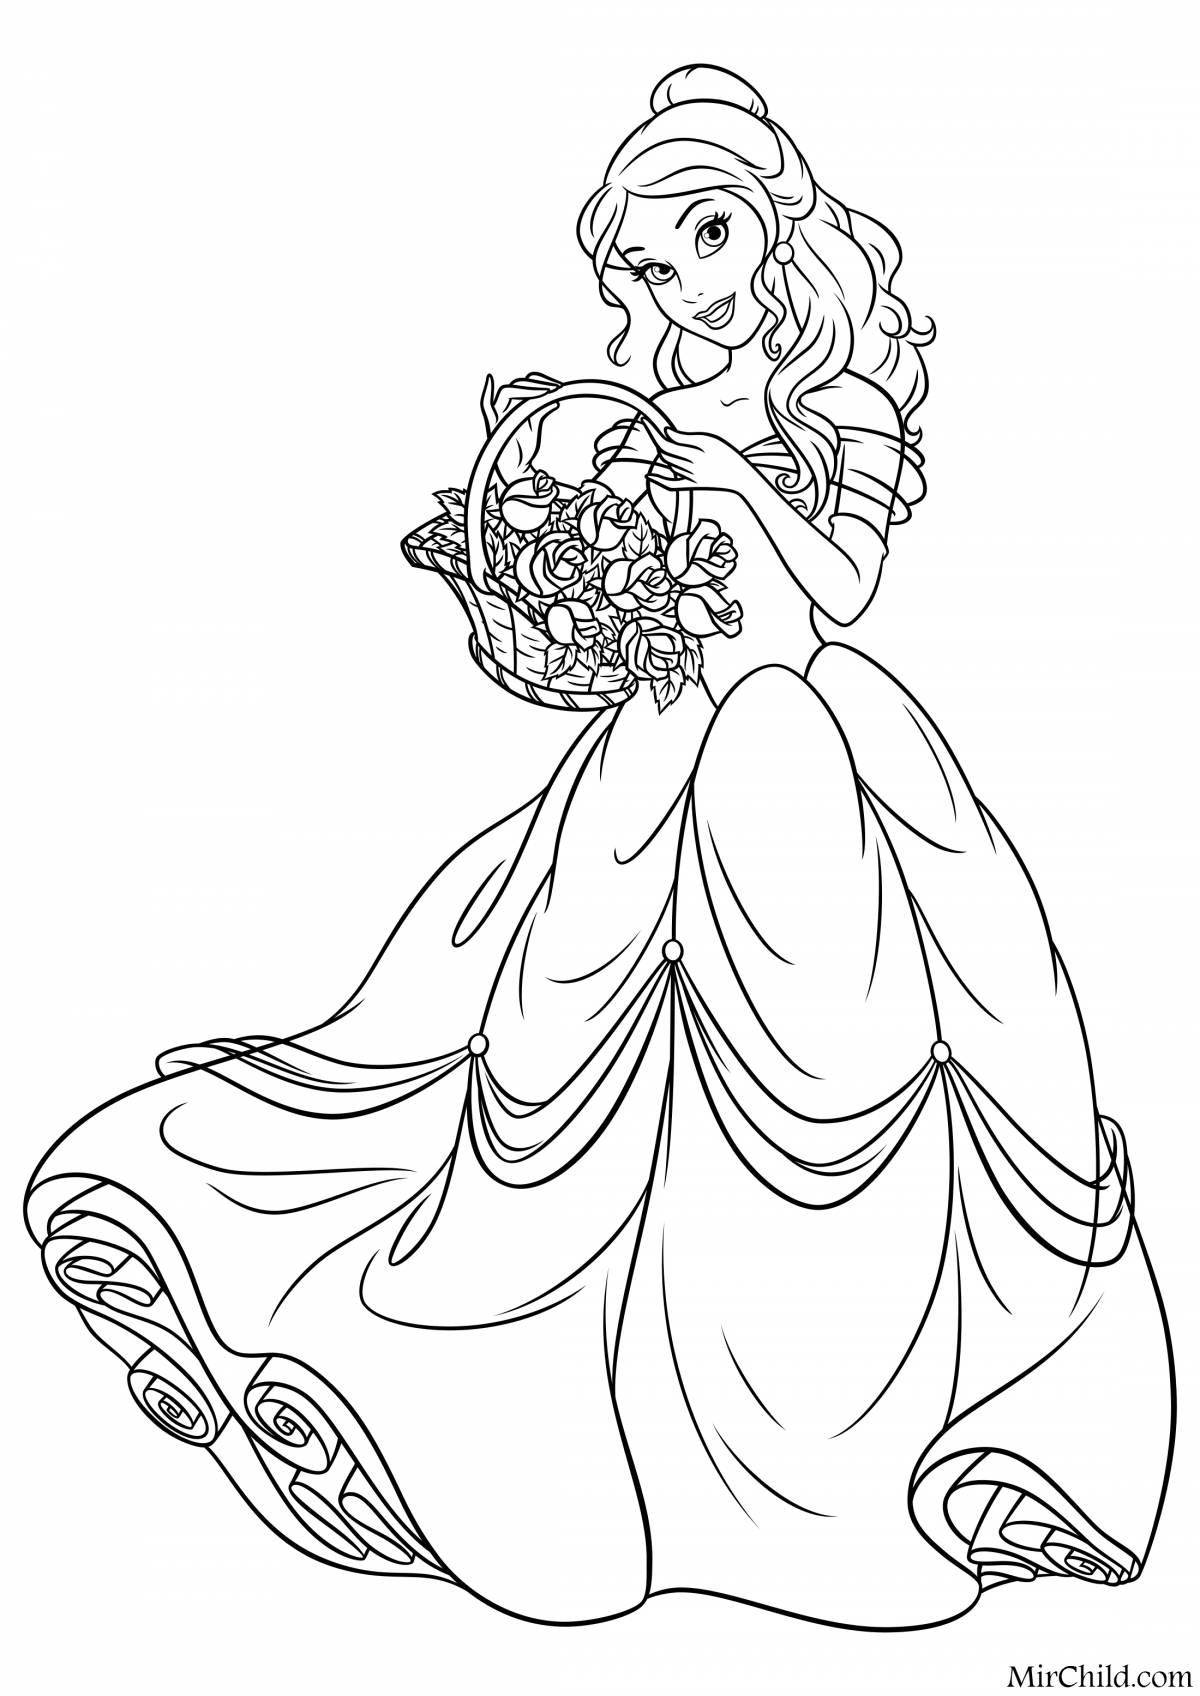 Disney coloring book for girls